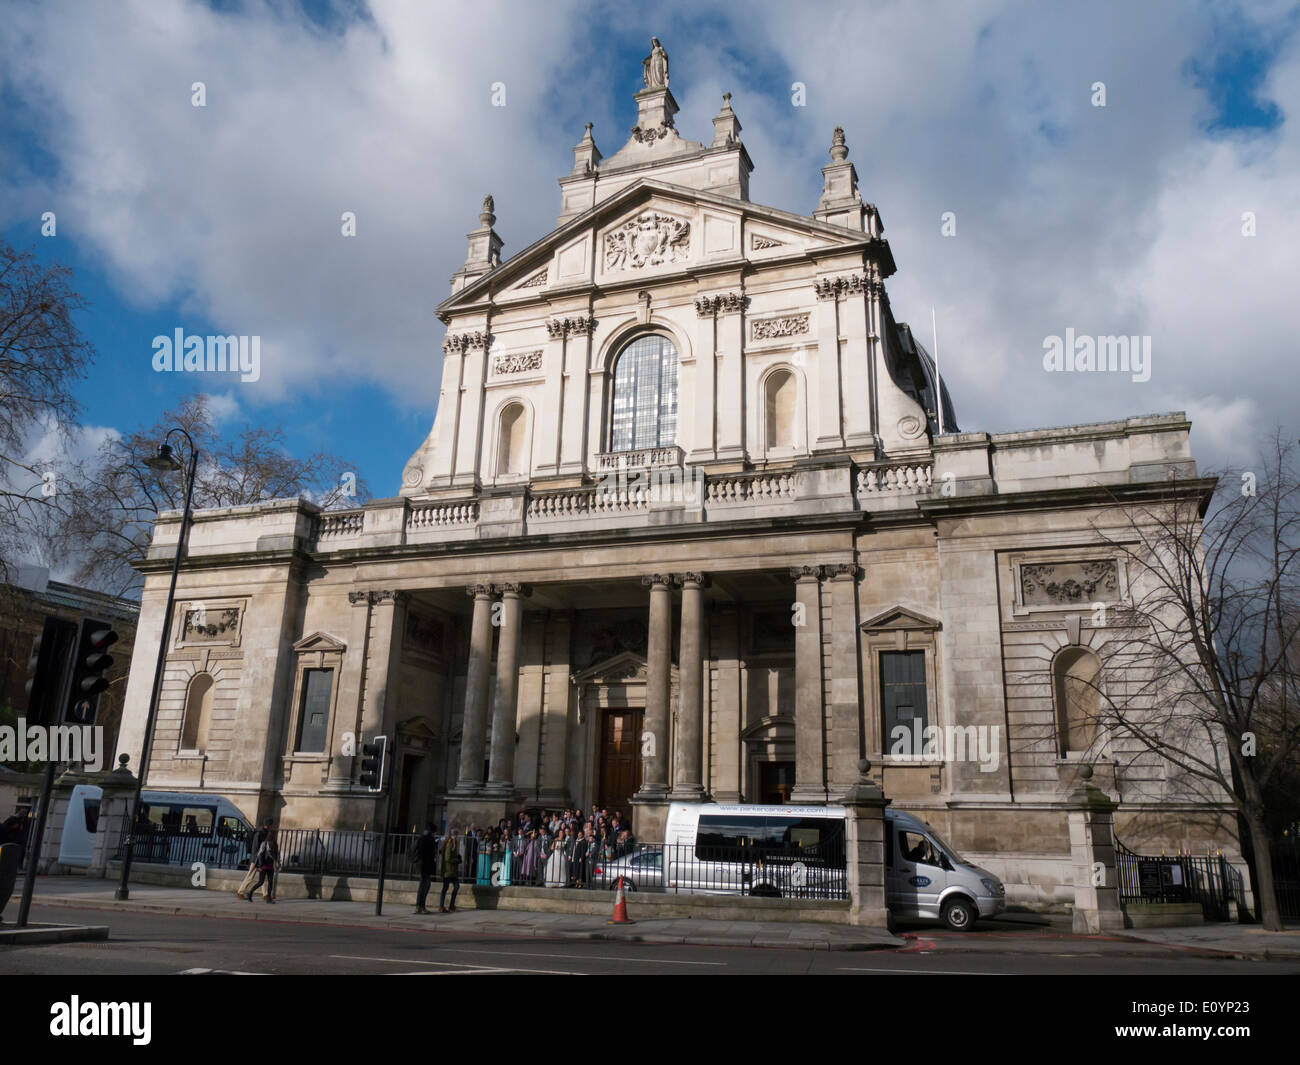 L'Europe, Royaume-Uni, Angleterre, Londres, Brompton Oratory Banque D'Images